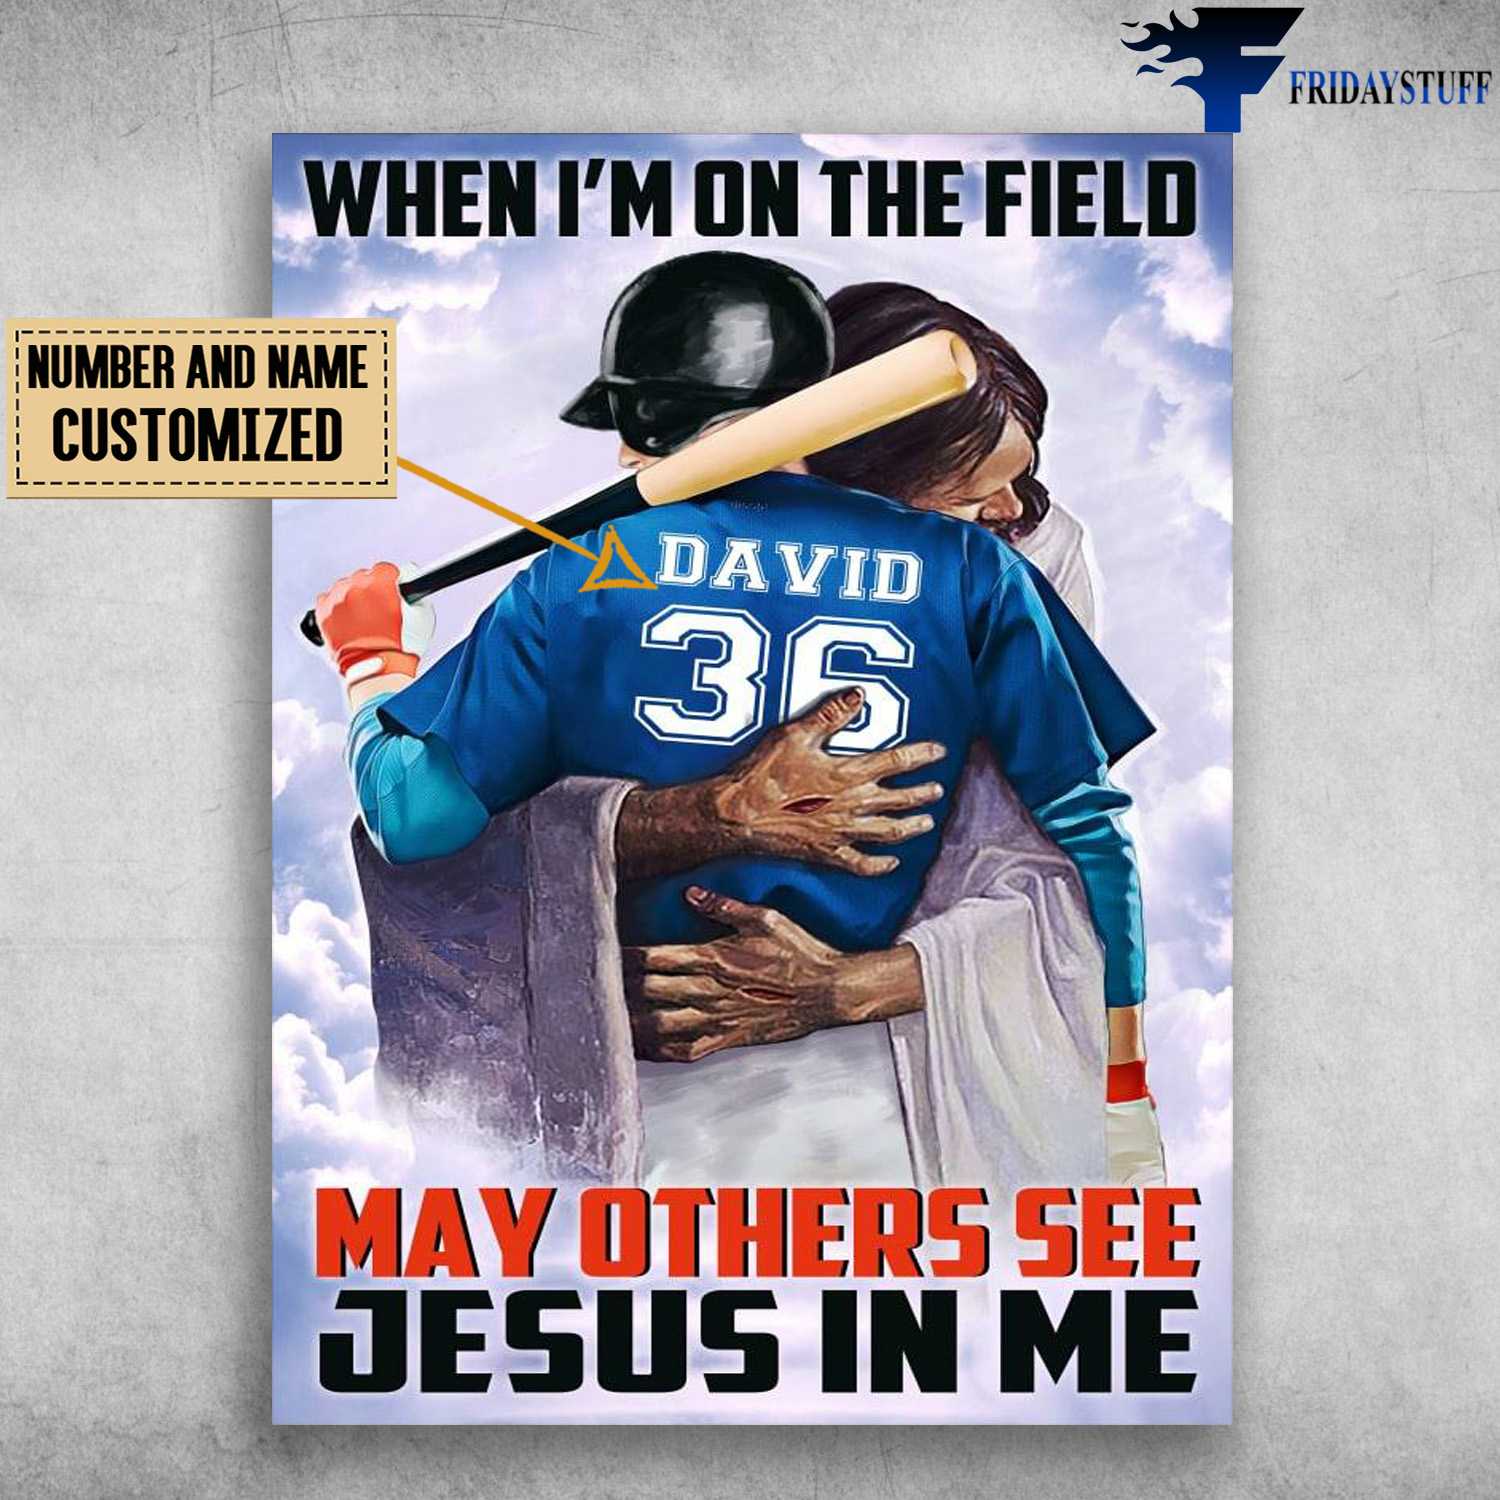 Baseball Lover, God Always Beside You, When I'm On The Field, My Others See Jesus In Me